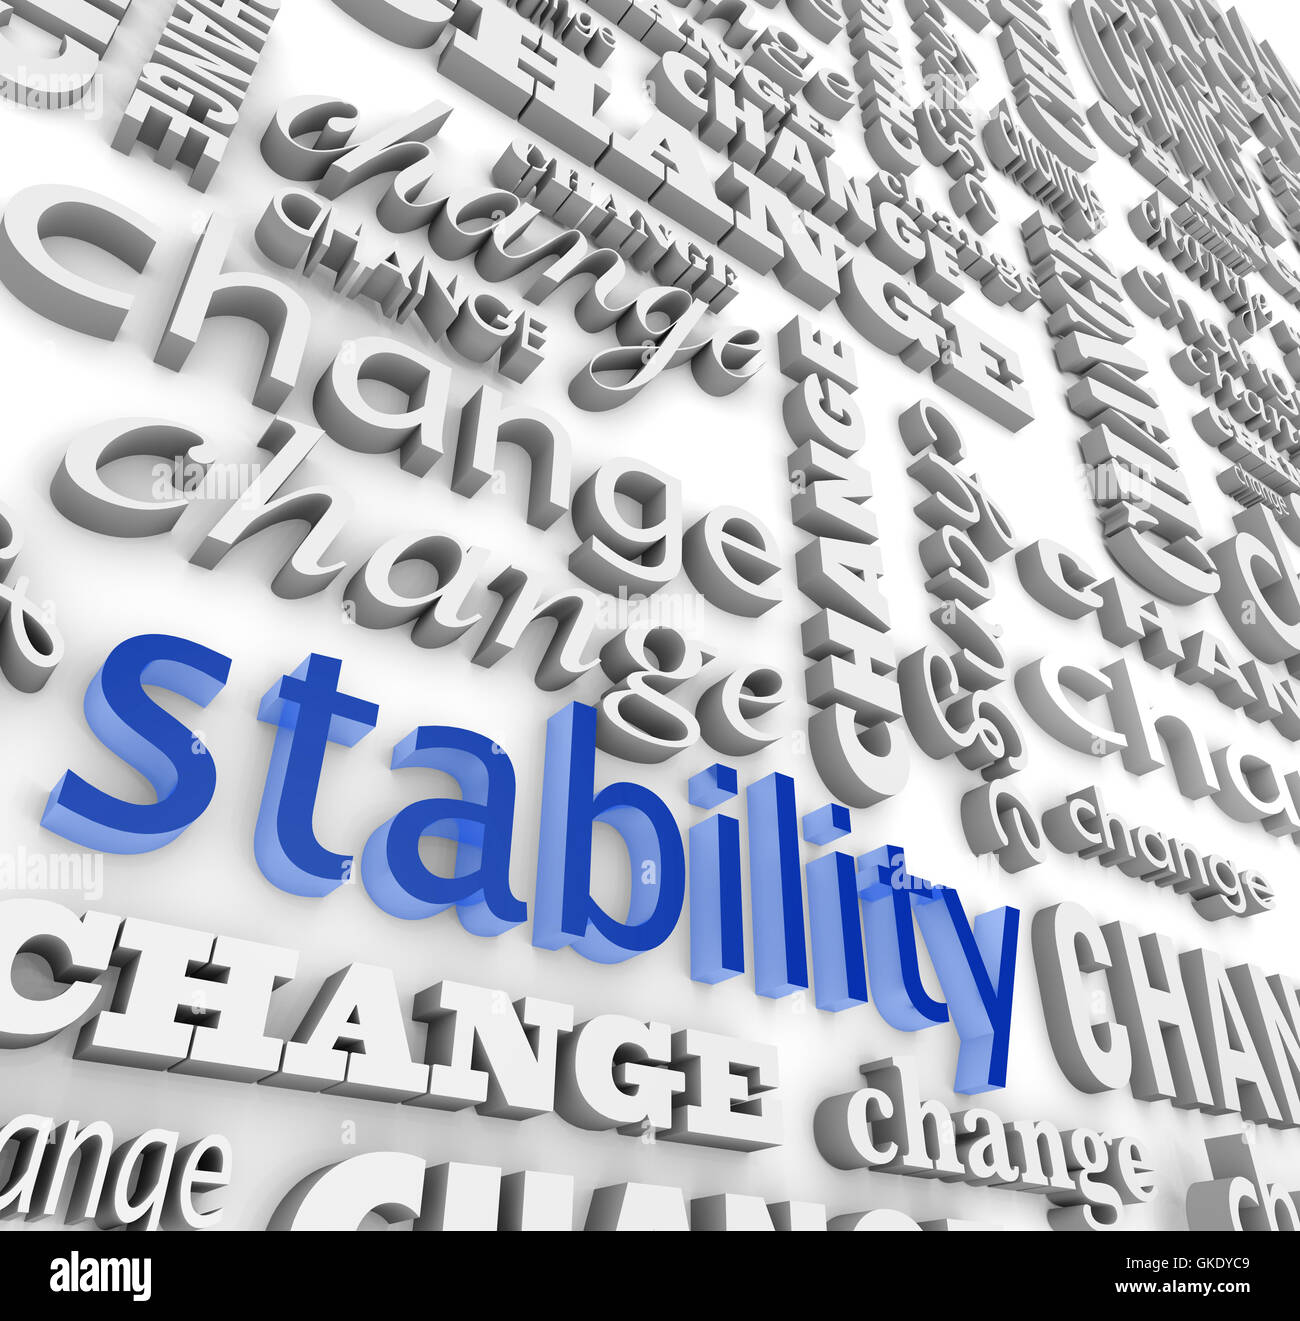 Finding Stability in the Midst of Change Stock Photo